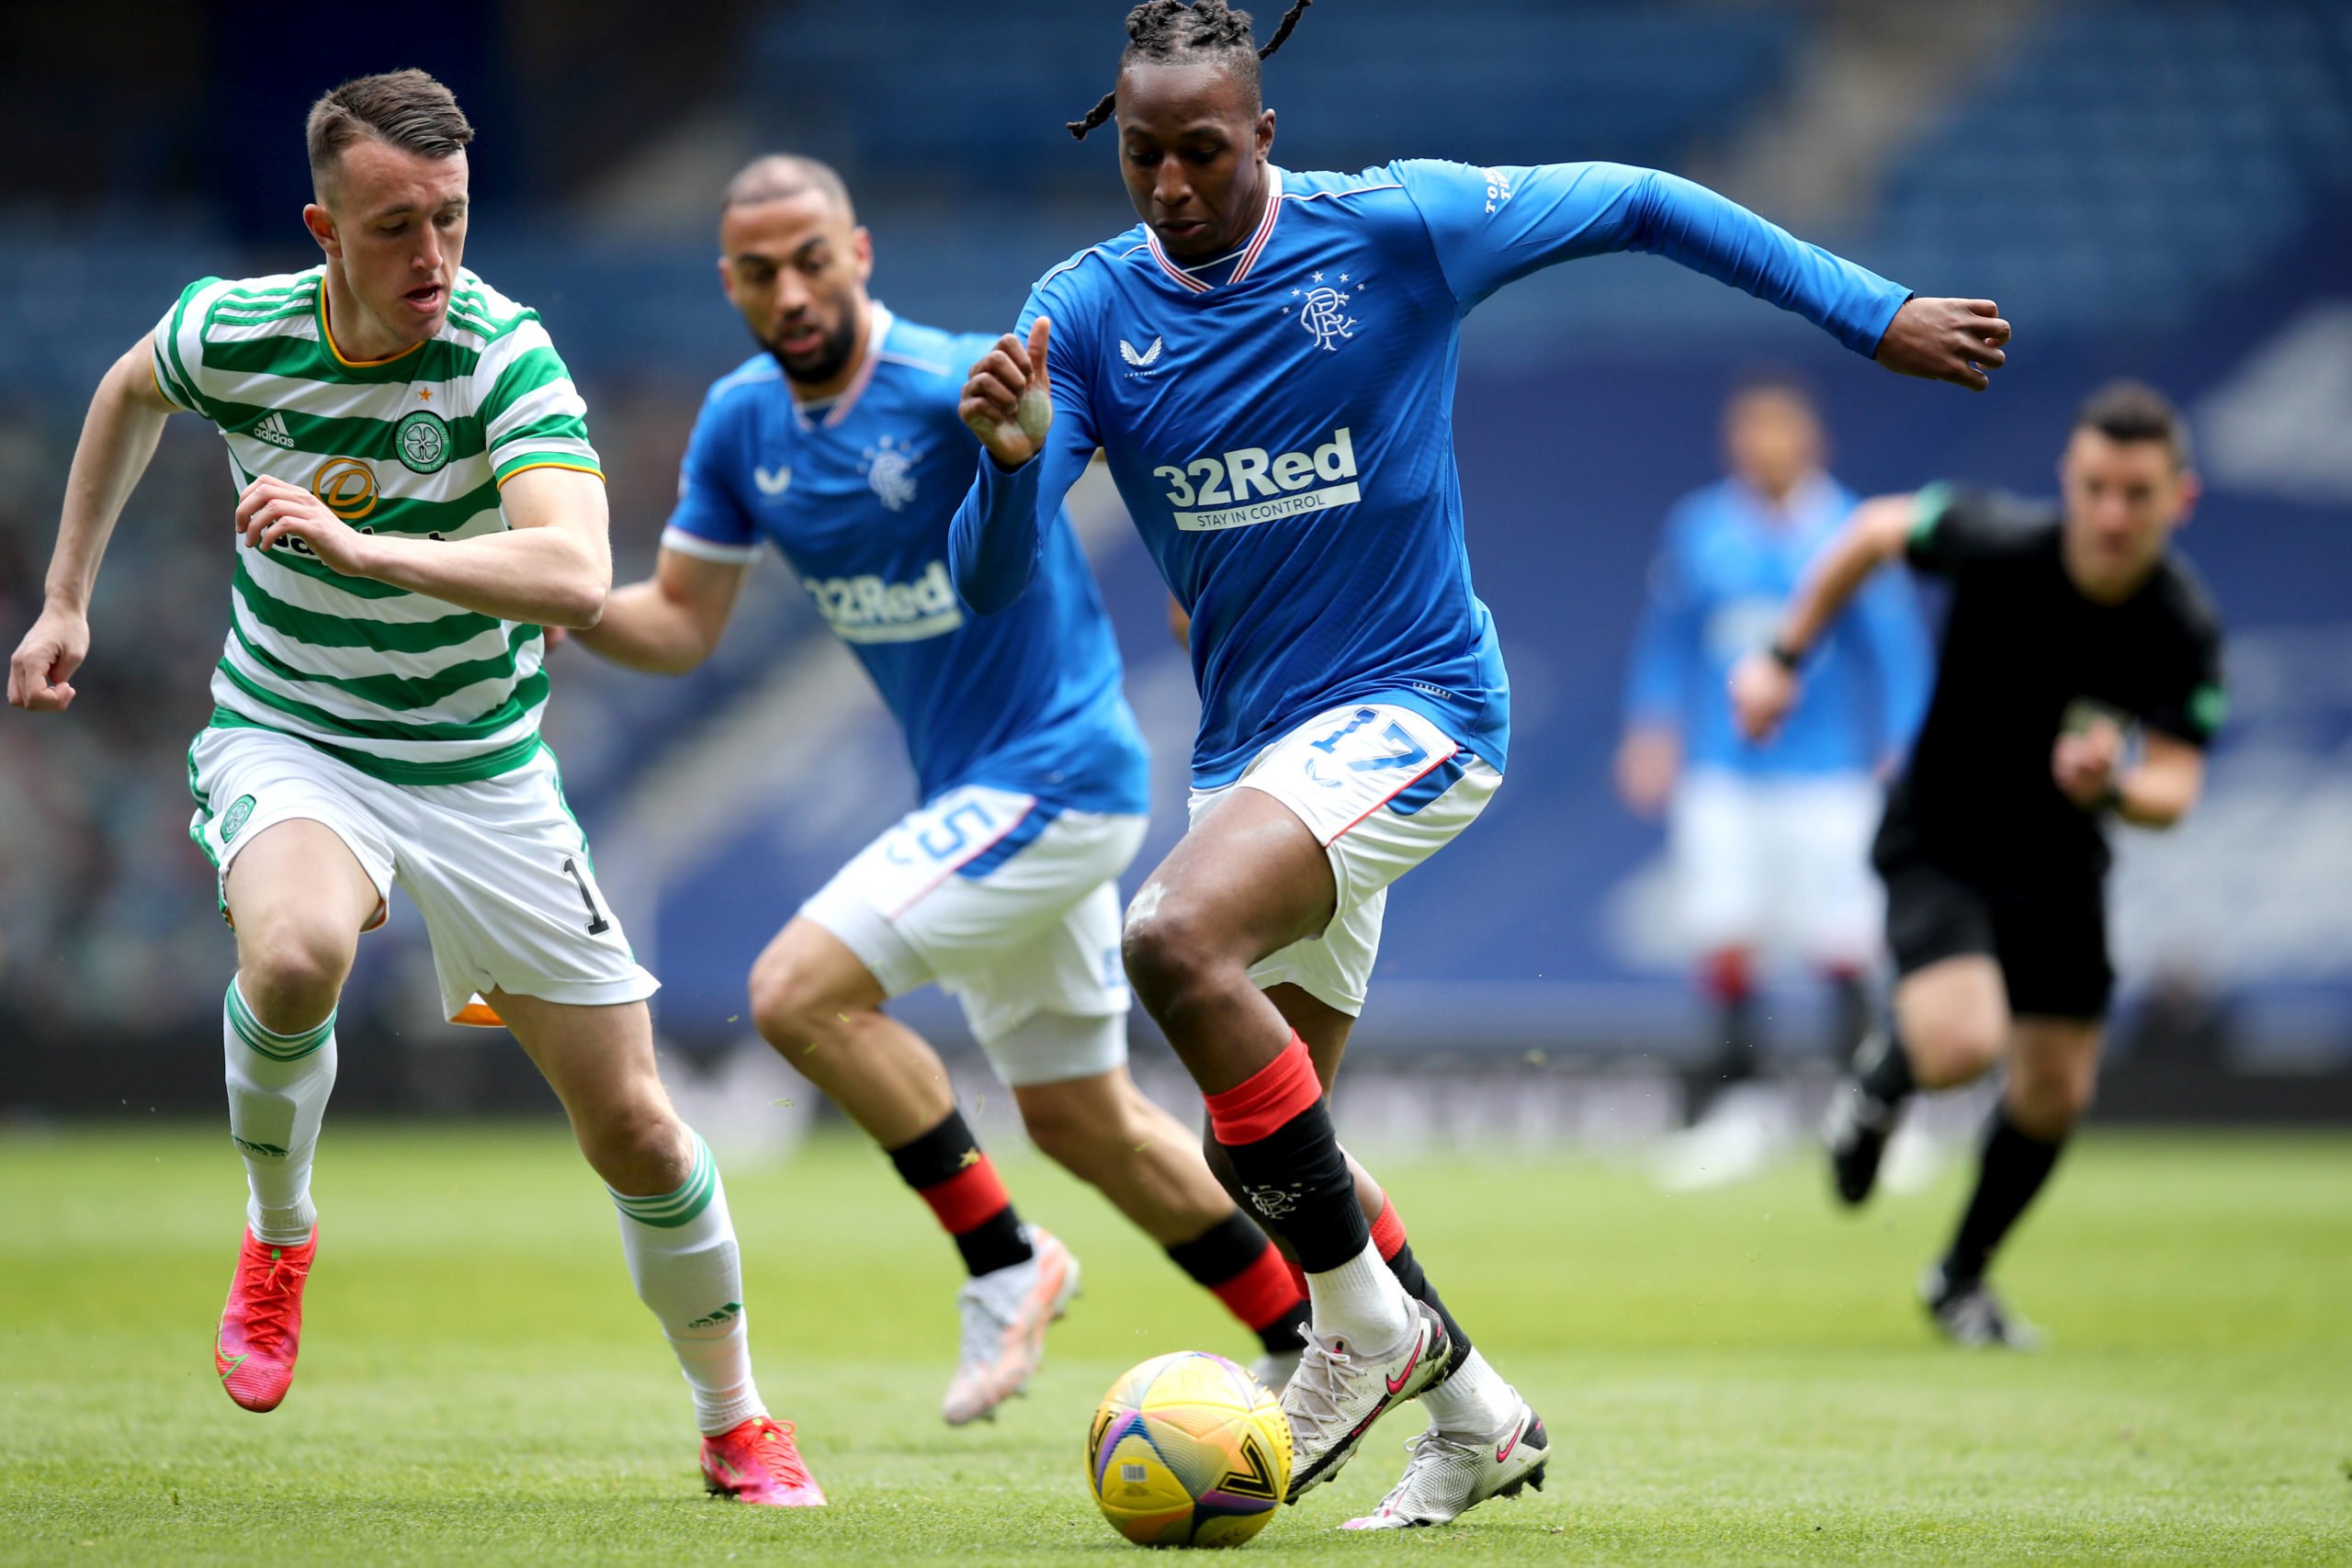 Rangers star Joe Aribo in action against Celtic in the Old Firm derby